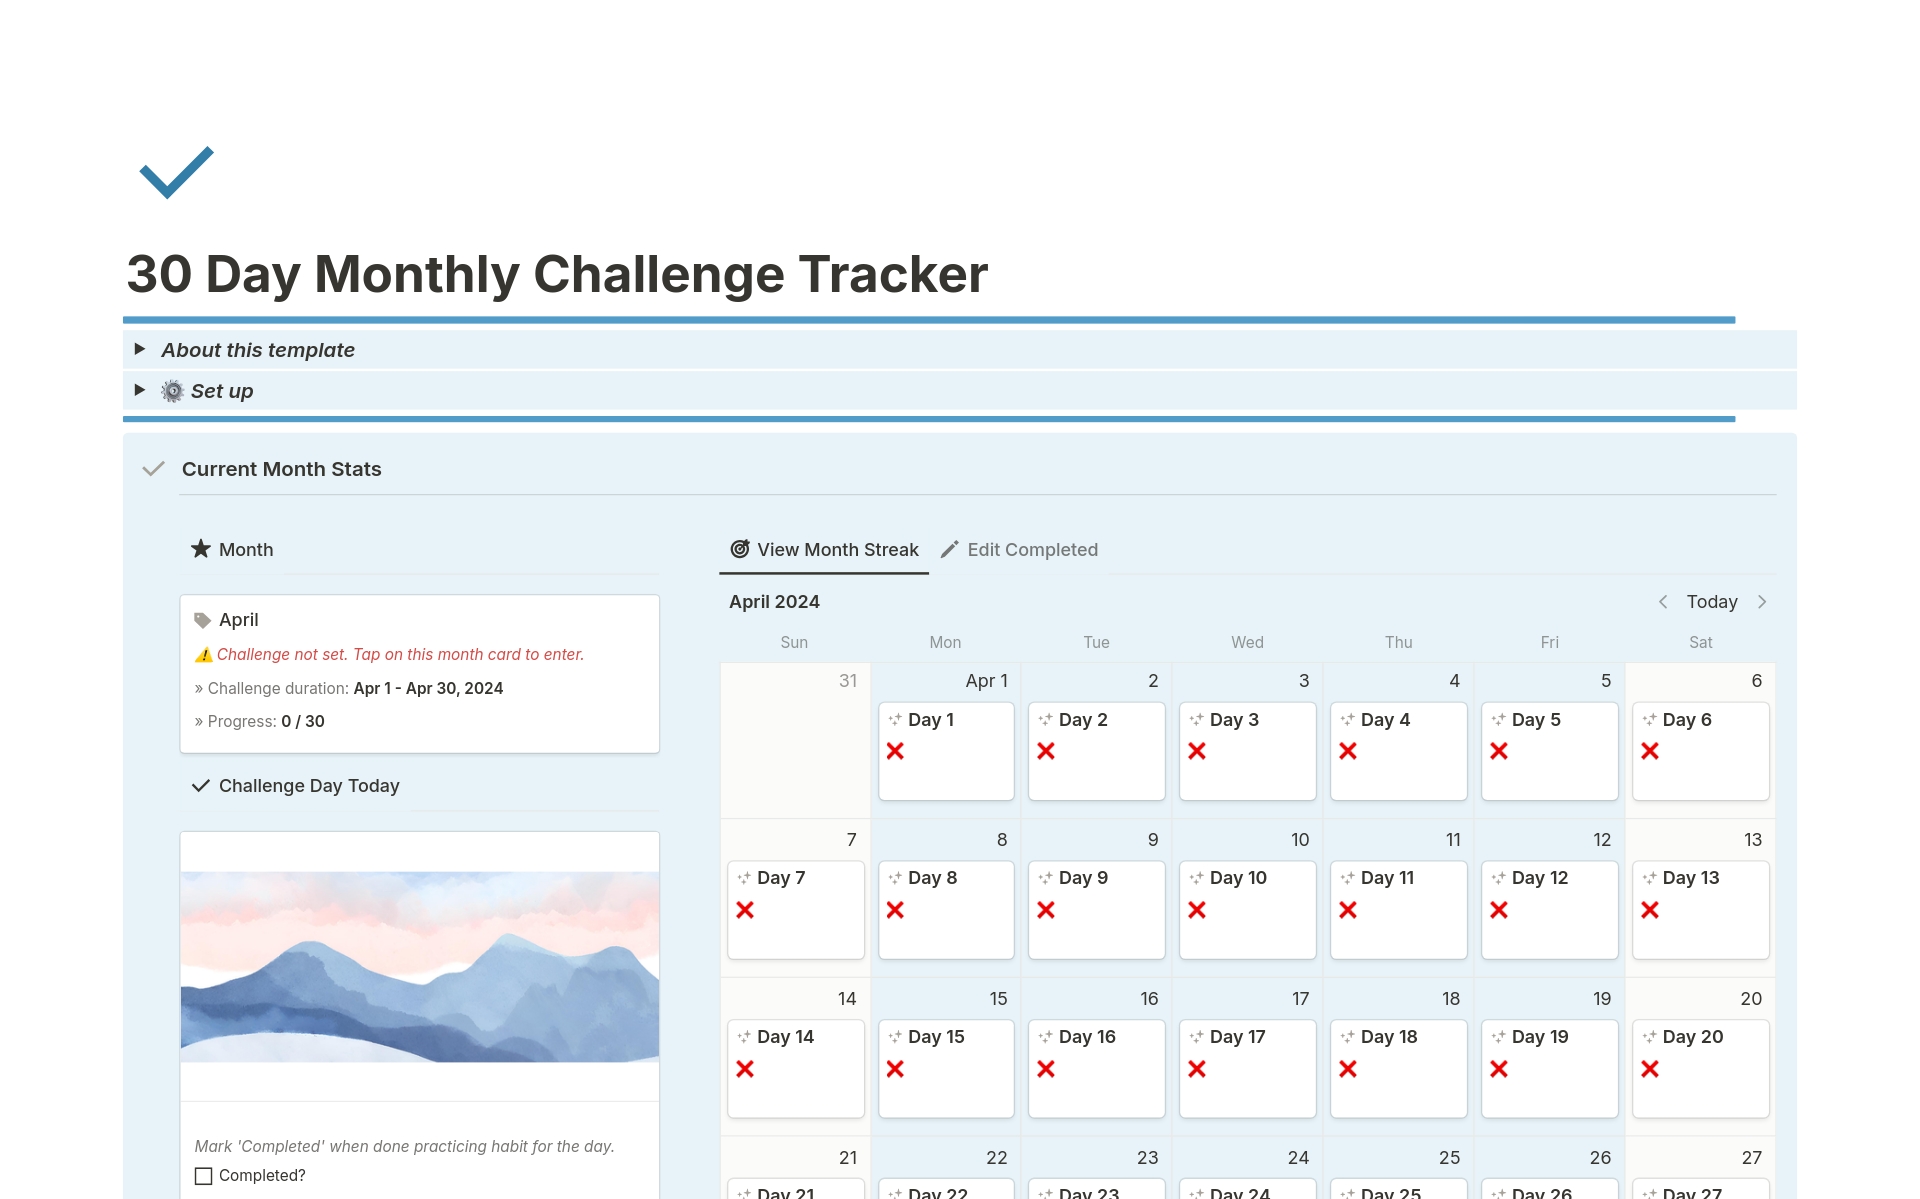 Simple & visually appealing workbook designed for monitoring your progress through any 30 day challenge. Manage up to 12 challenges in a year with ease!